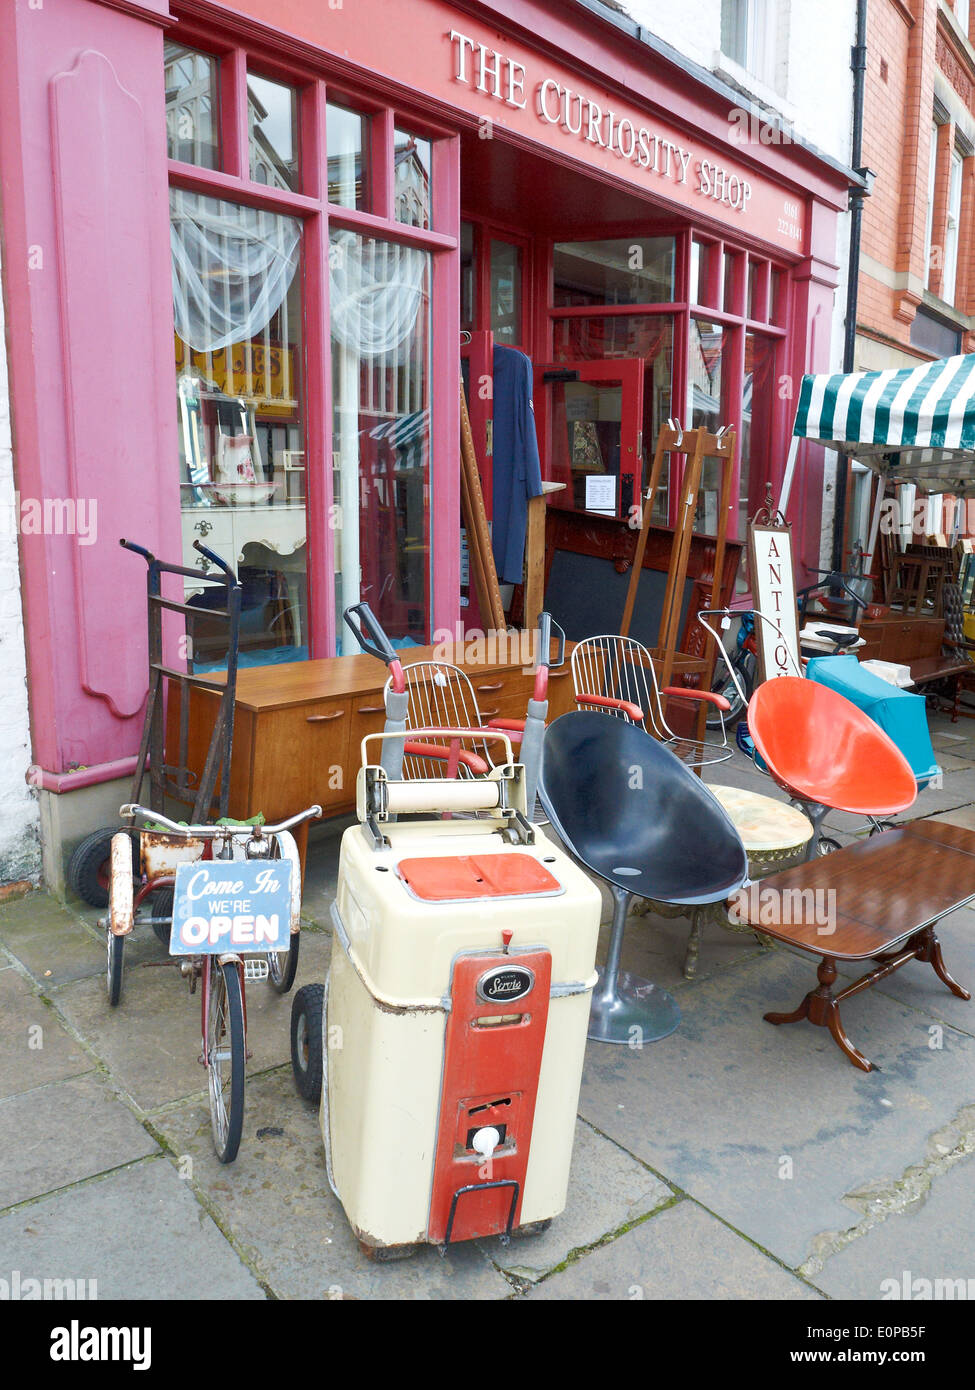 The curiosity shop in Stockport Cheshire UK Stock Photo